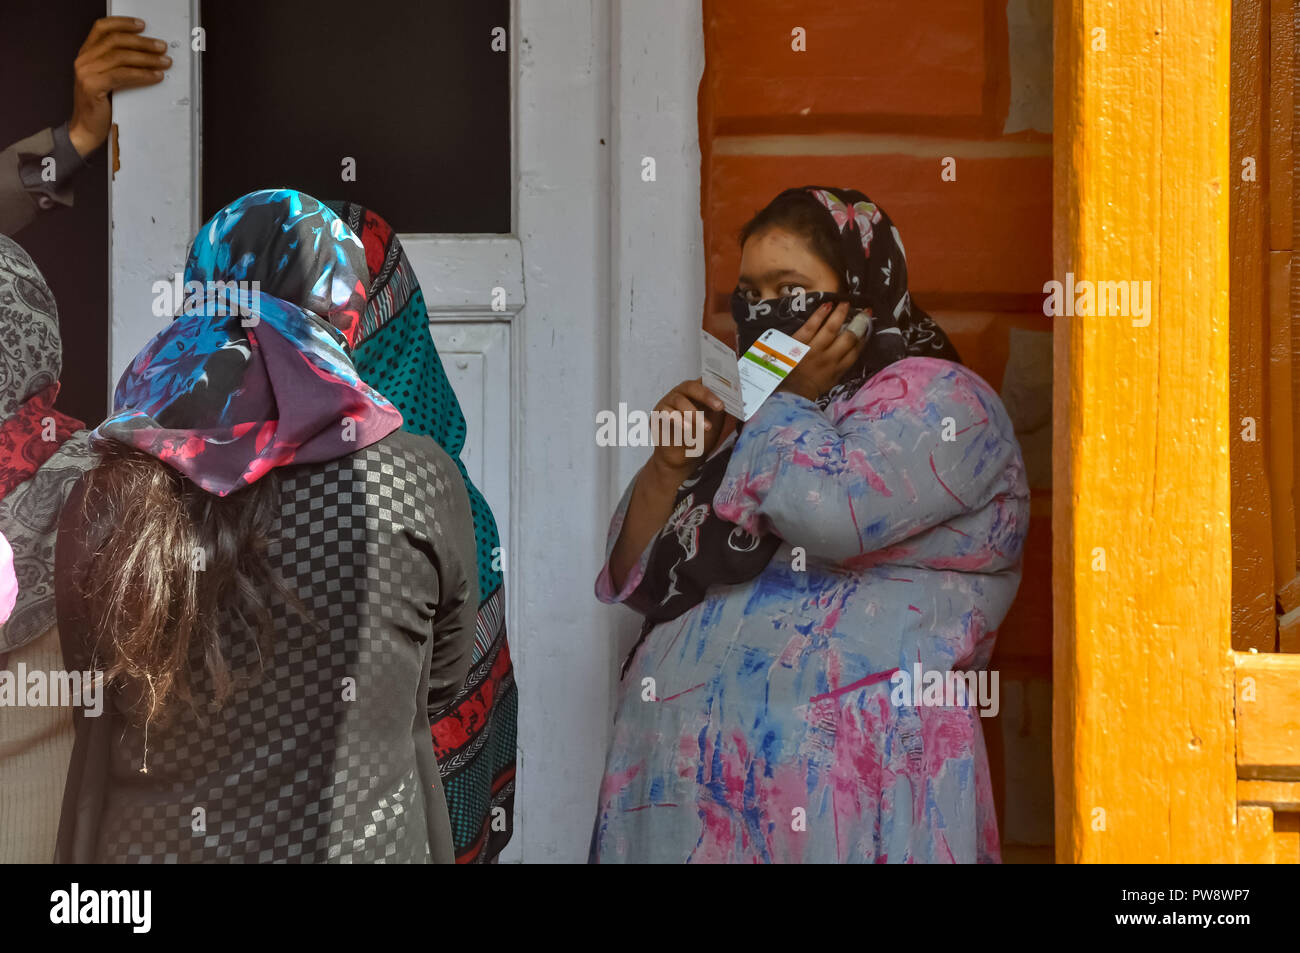 October 13, 2018 - Srinagar, Jammu & Kashmir, India - Kashmiri women are seen hiding their faces as they stands outside waiting to caste their ballots during the third phase of local elections.A Complete Strike was observed in poll bound areas of Srinagar where they recorded the lowest voter turnout with less than three per cent electorates exercising their franchise during the ongoing municipal polls. Credit: Idrees Abbas/SOPA Images/ZUMA Wire/Alamy Live News Stock Photo